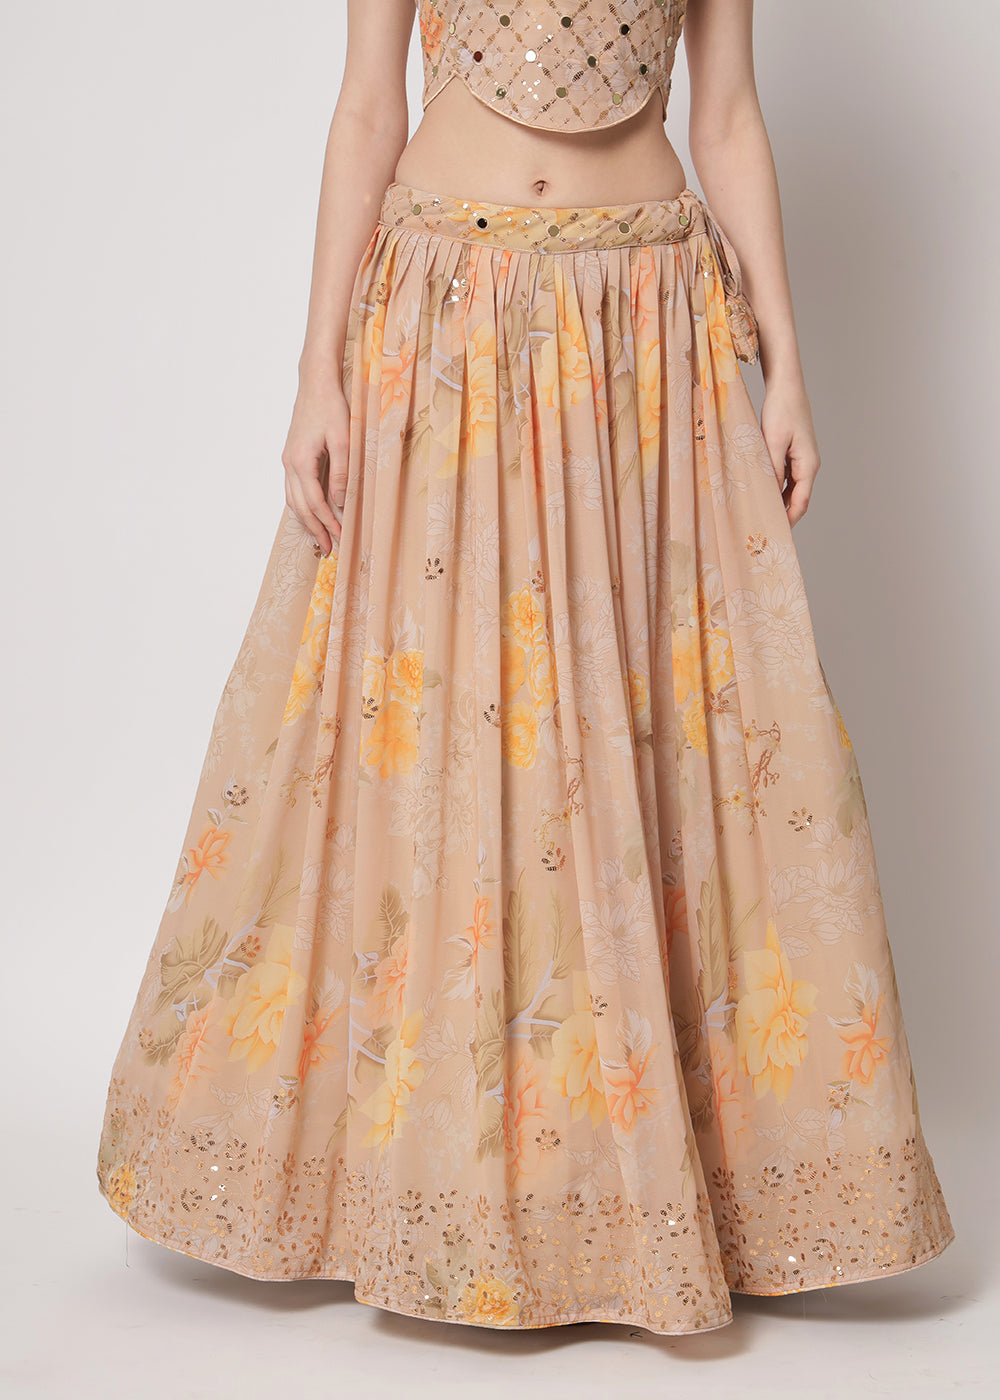 Buy Now Georgette Beige Sequins & Printed Wedding Party Lehenga Choli Online in USA, UK, Canada & Worldwide at Empress Clothing. 